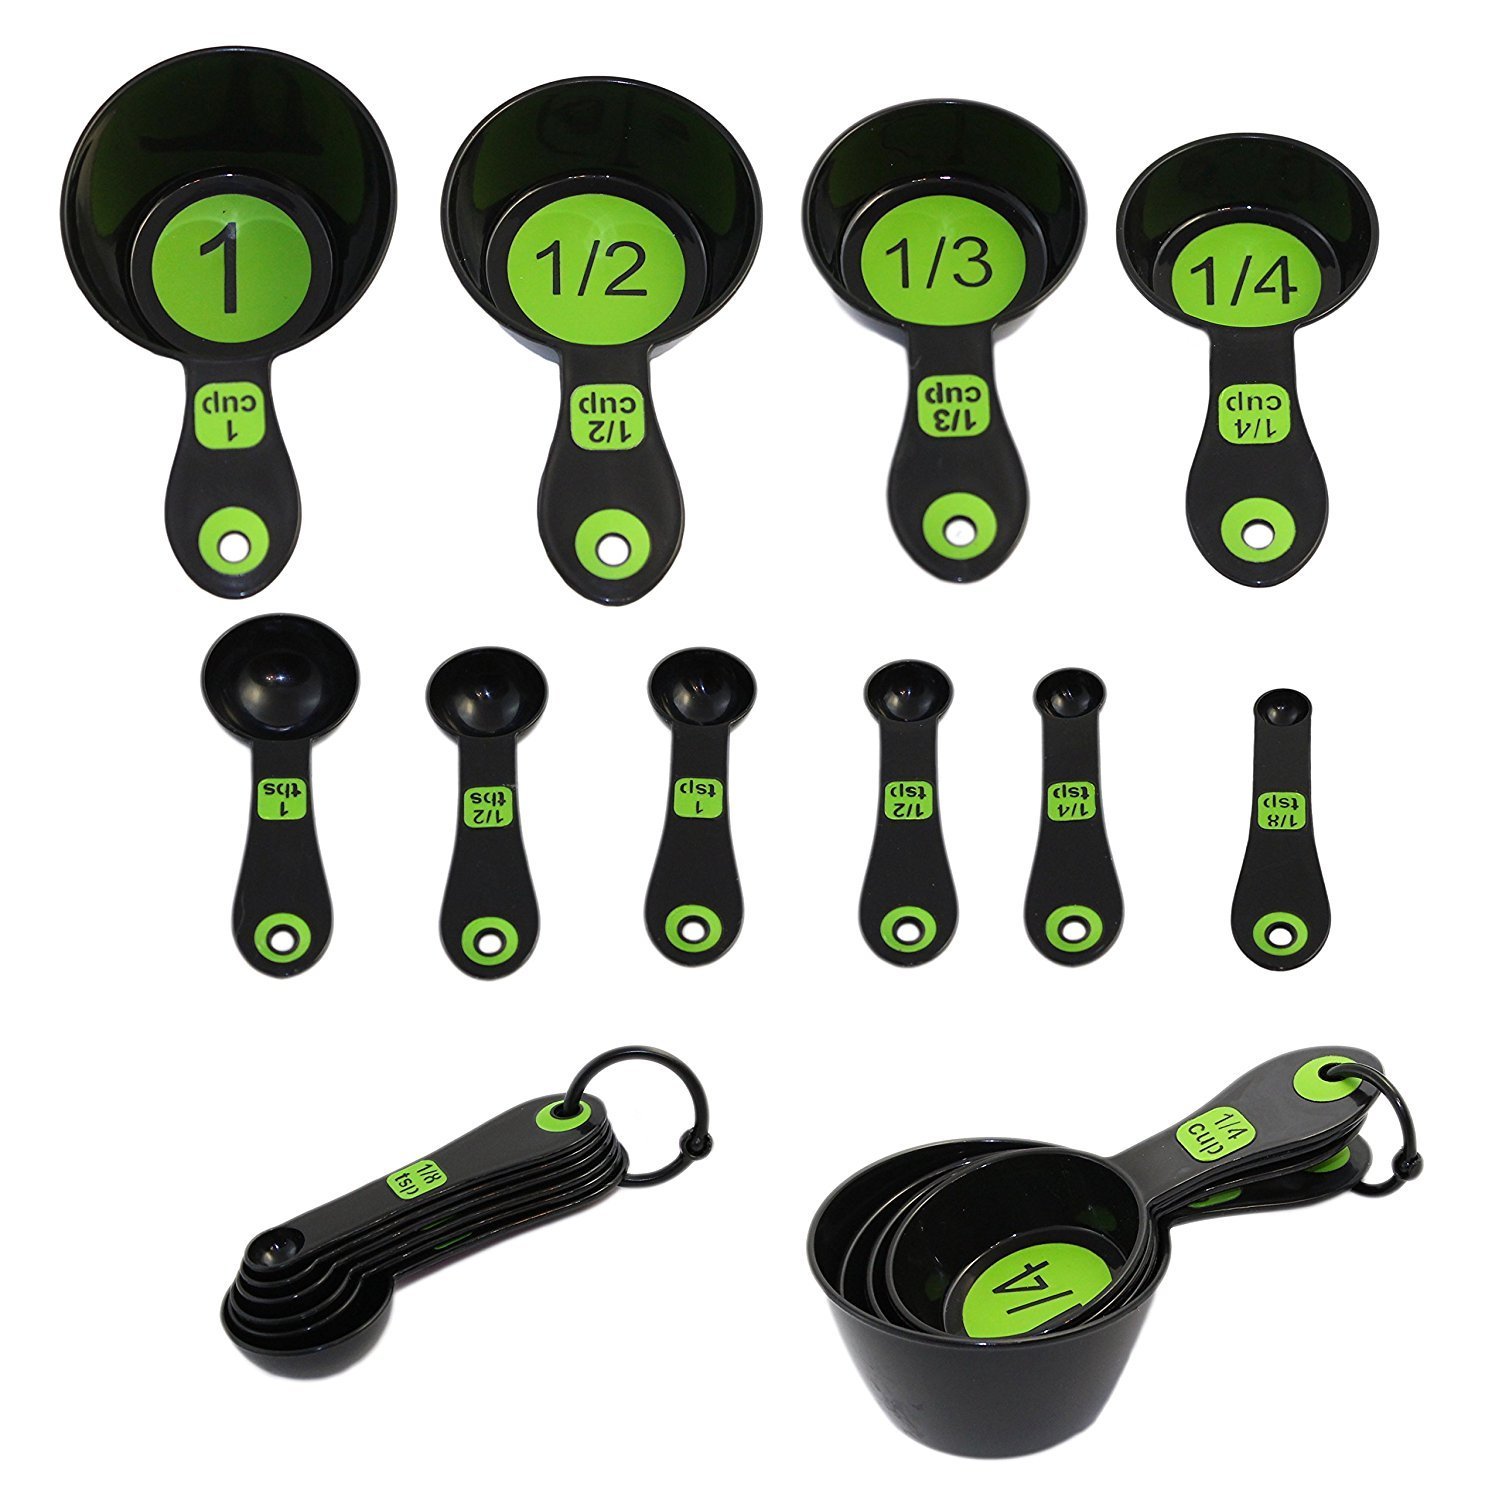 Chef Craft Set of 10 Piece Plastic Measuring Spoons and Measuring Cups (Black & Green) - image 1 of 2